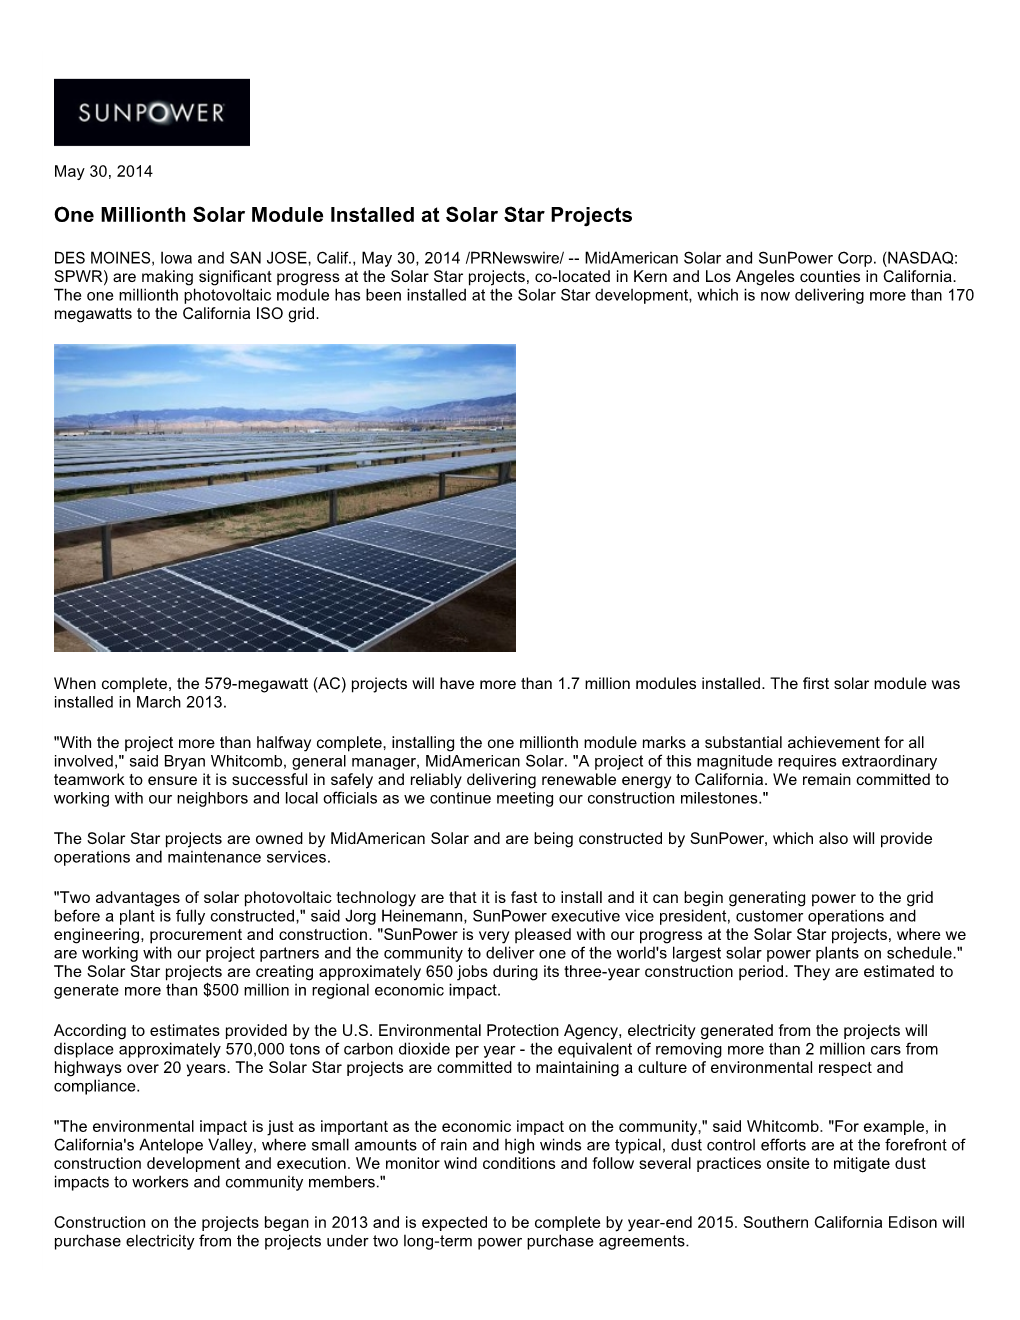 One Millionth Solar Module Installed at Solar Star Projects